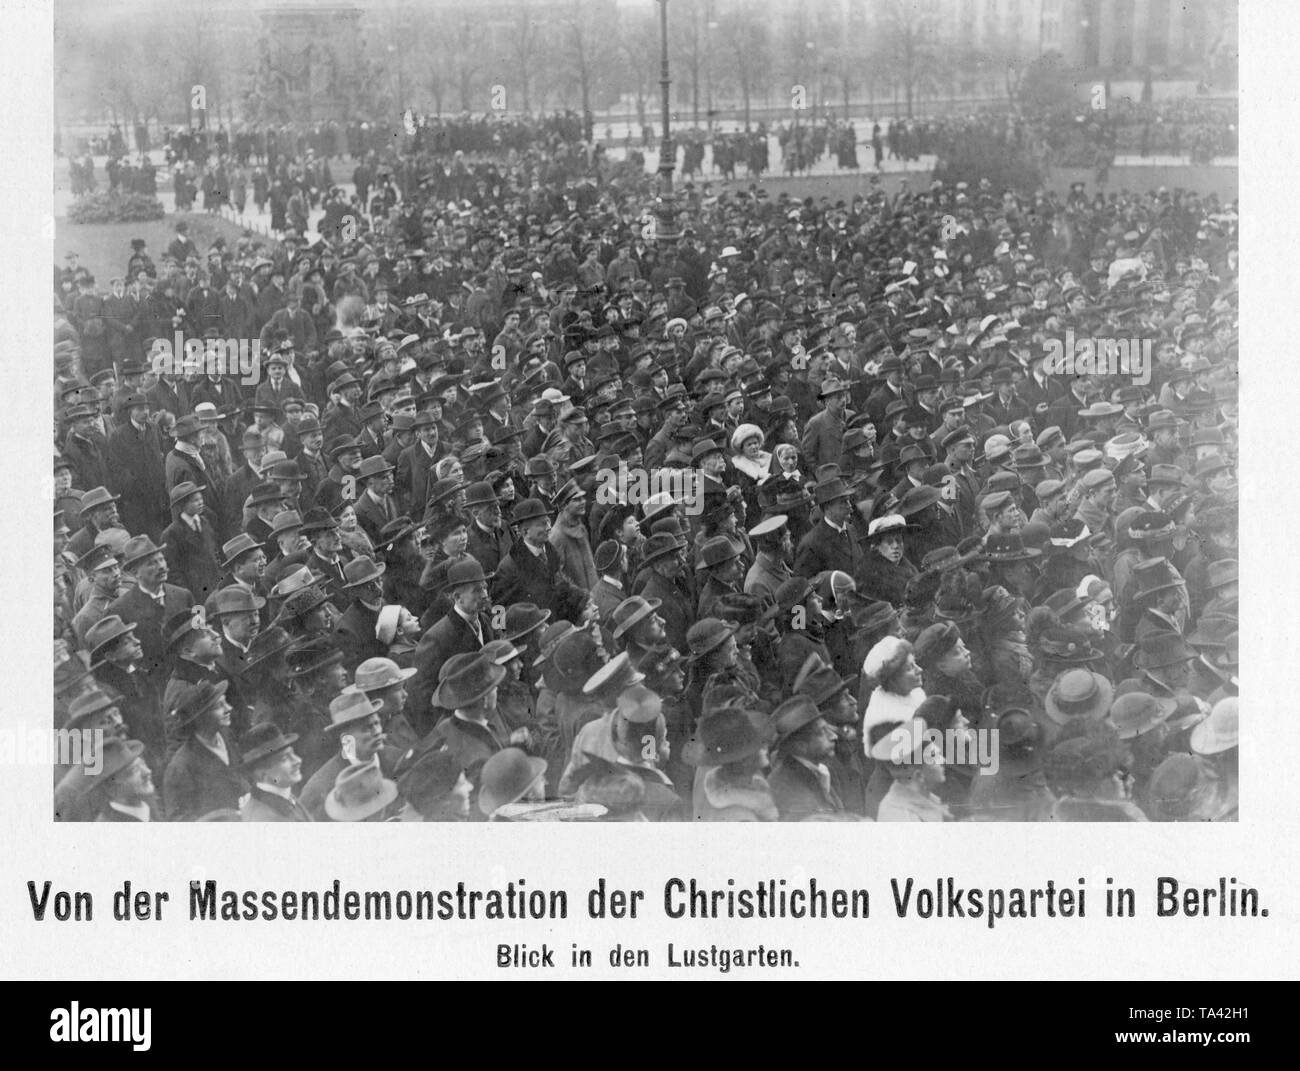 The Centre Party, which at that time still bore the alternative name of Christliche Volkspartei (Christian People's Party) organized a mass demonstration in Berlin's Lustgarten. Stock Photo